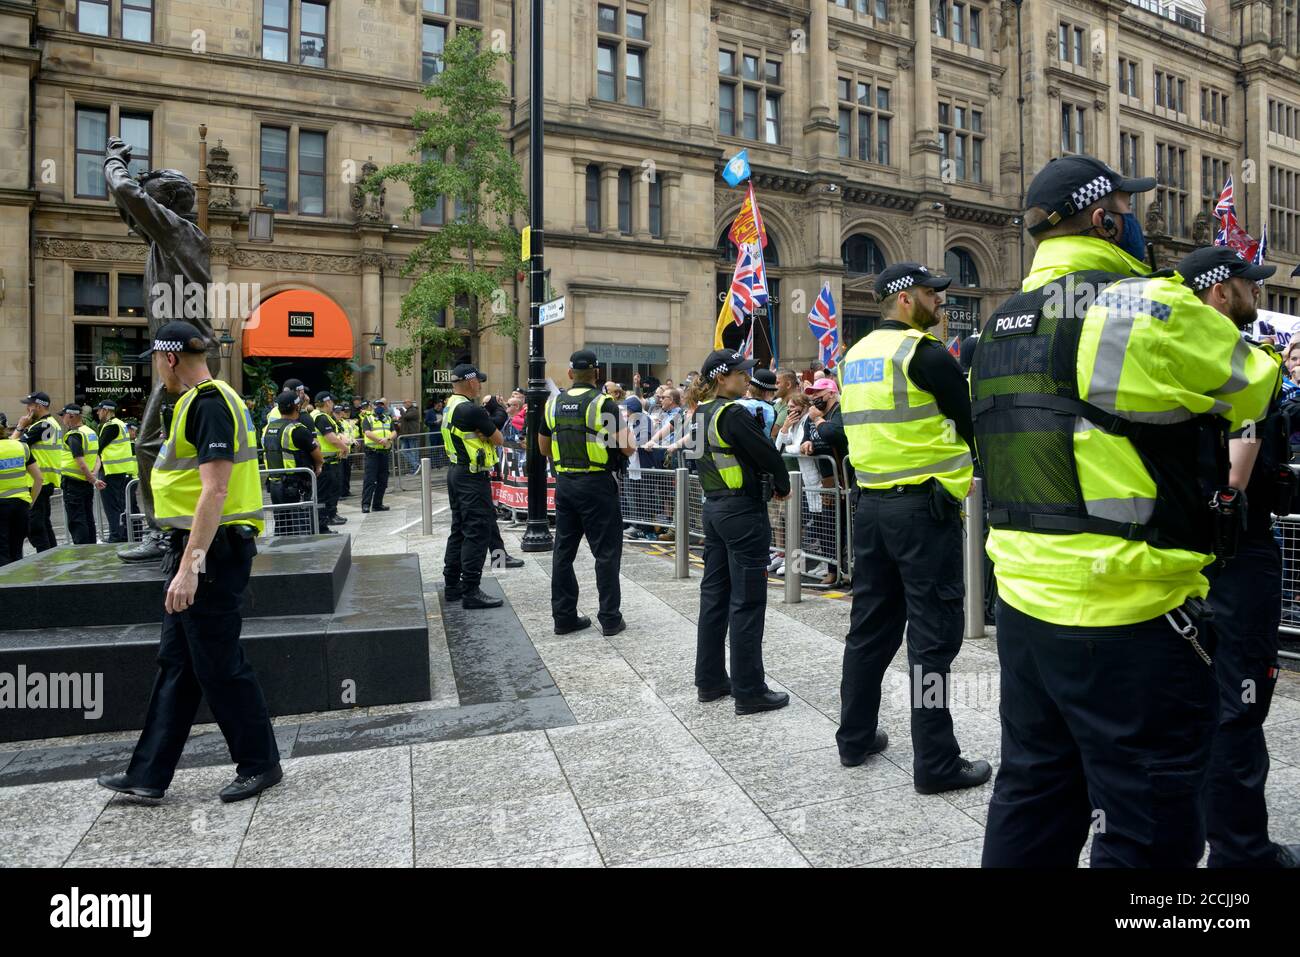 Police facing Right wing protesters, in Nottingham, Kettling. Stock Photo